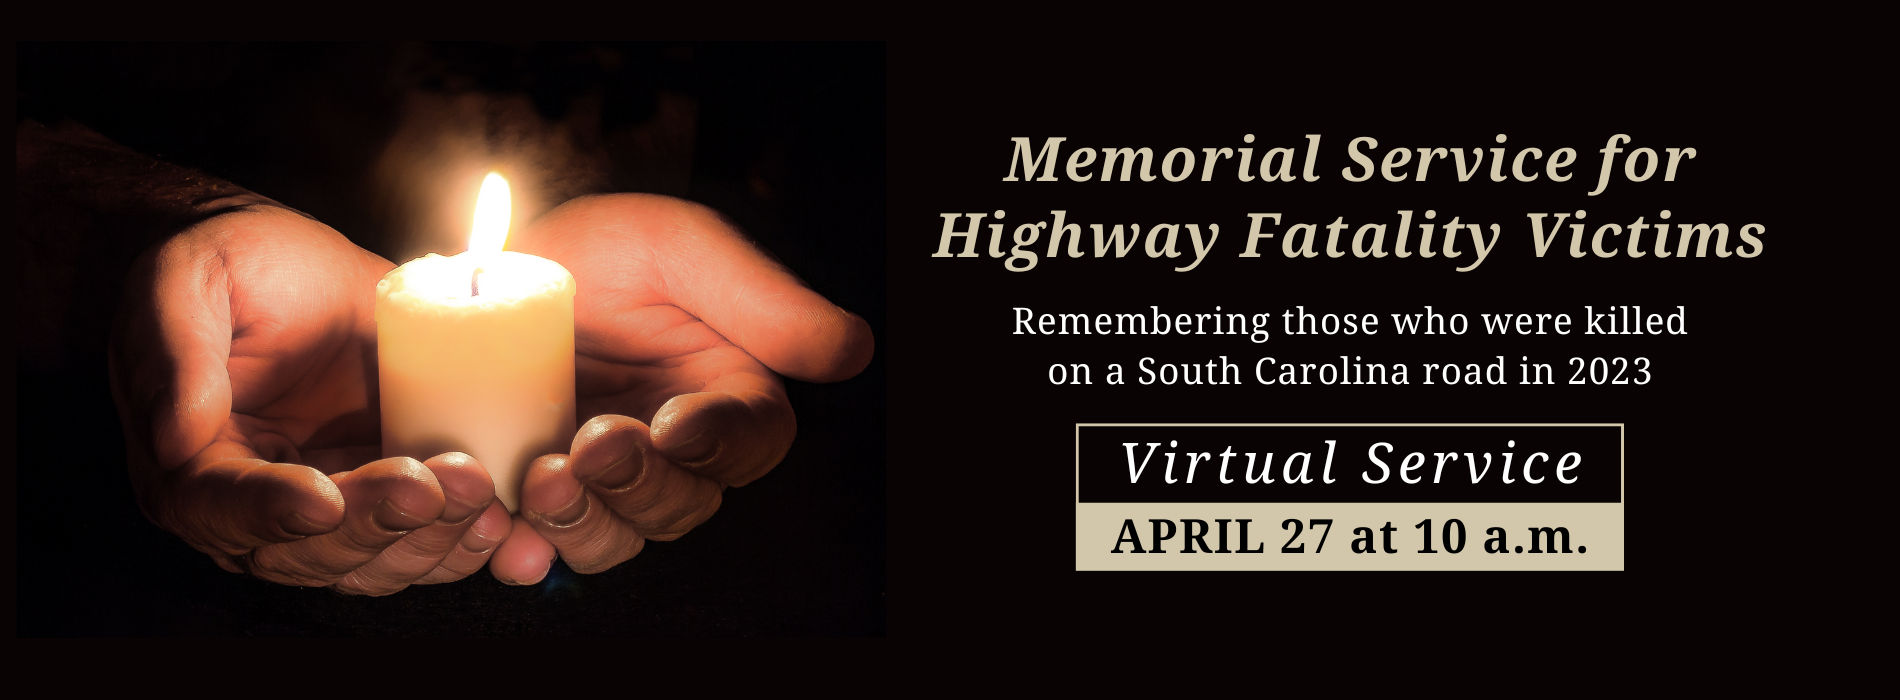 2023 Highway Fatality Memorial Service Webpage 